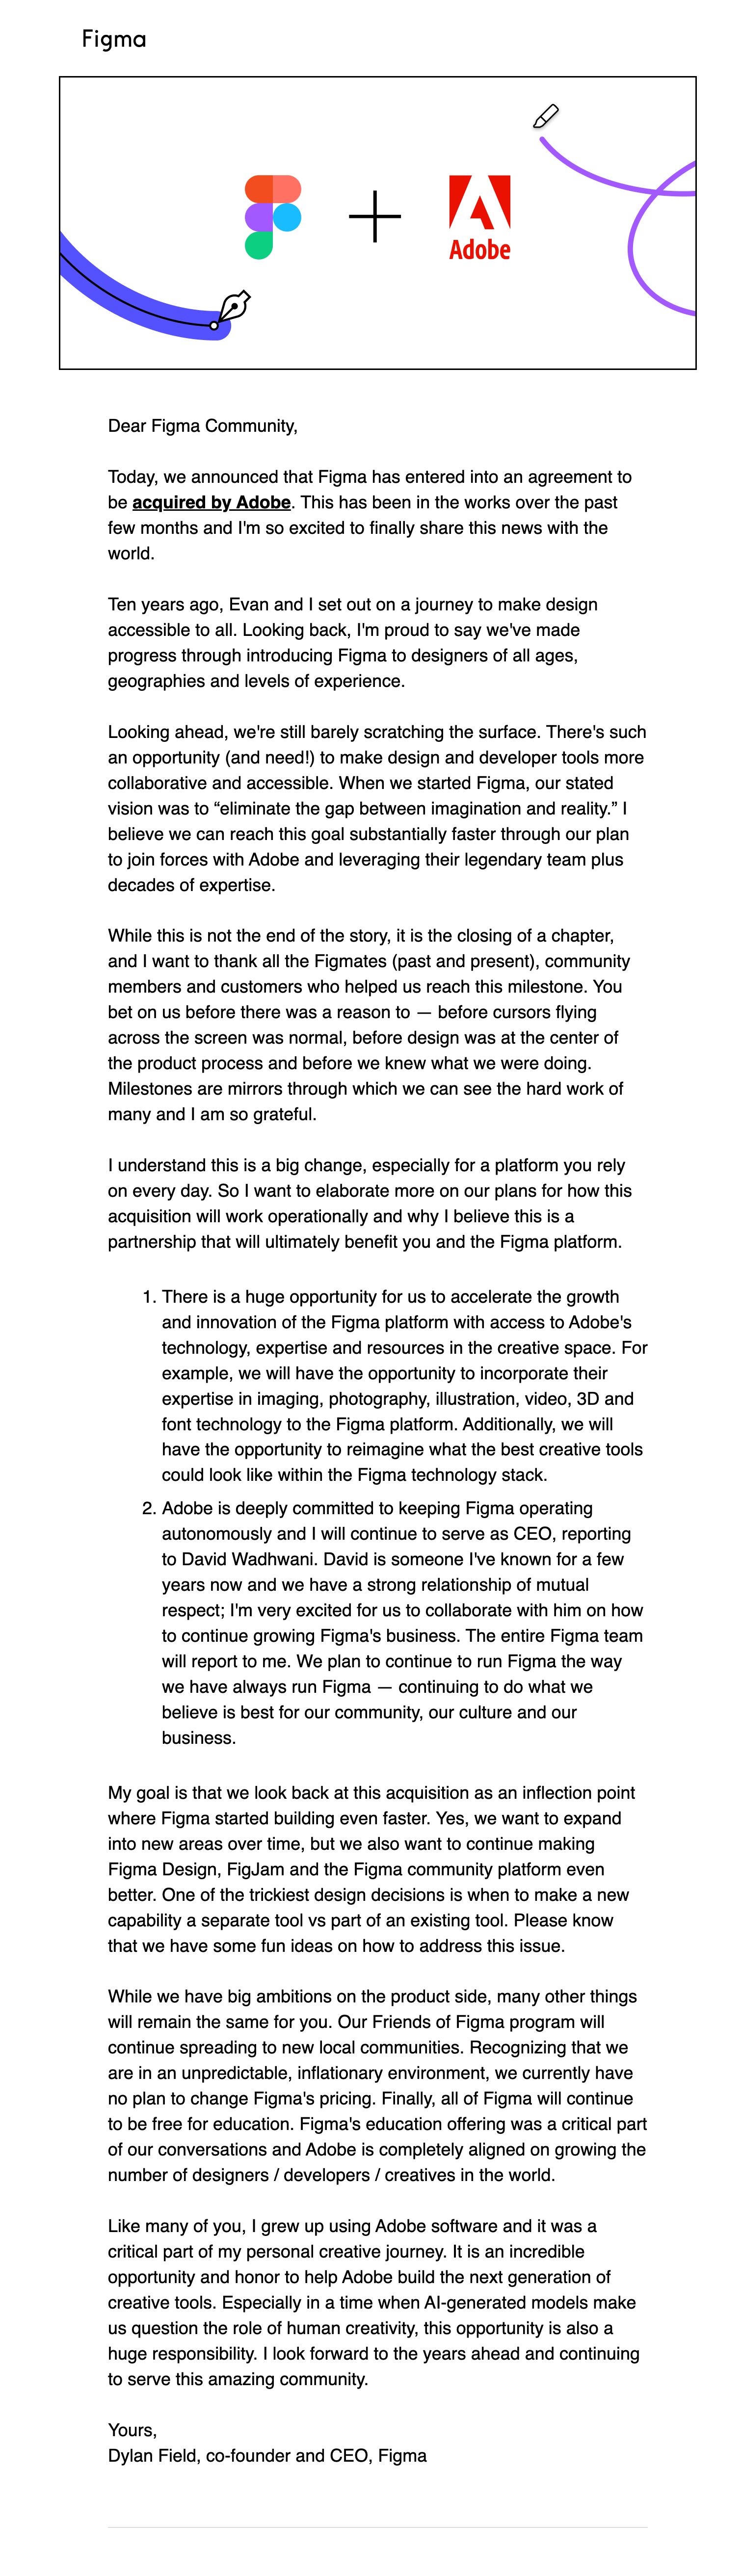 SaaS Company Acquisition Announcement Emails: Screenshot of Figma's announcement email when they got acquired by Adobe